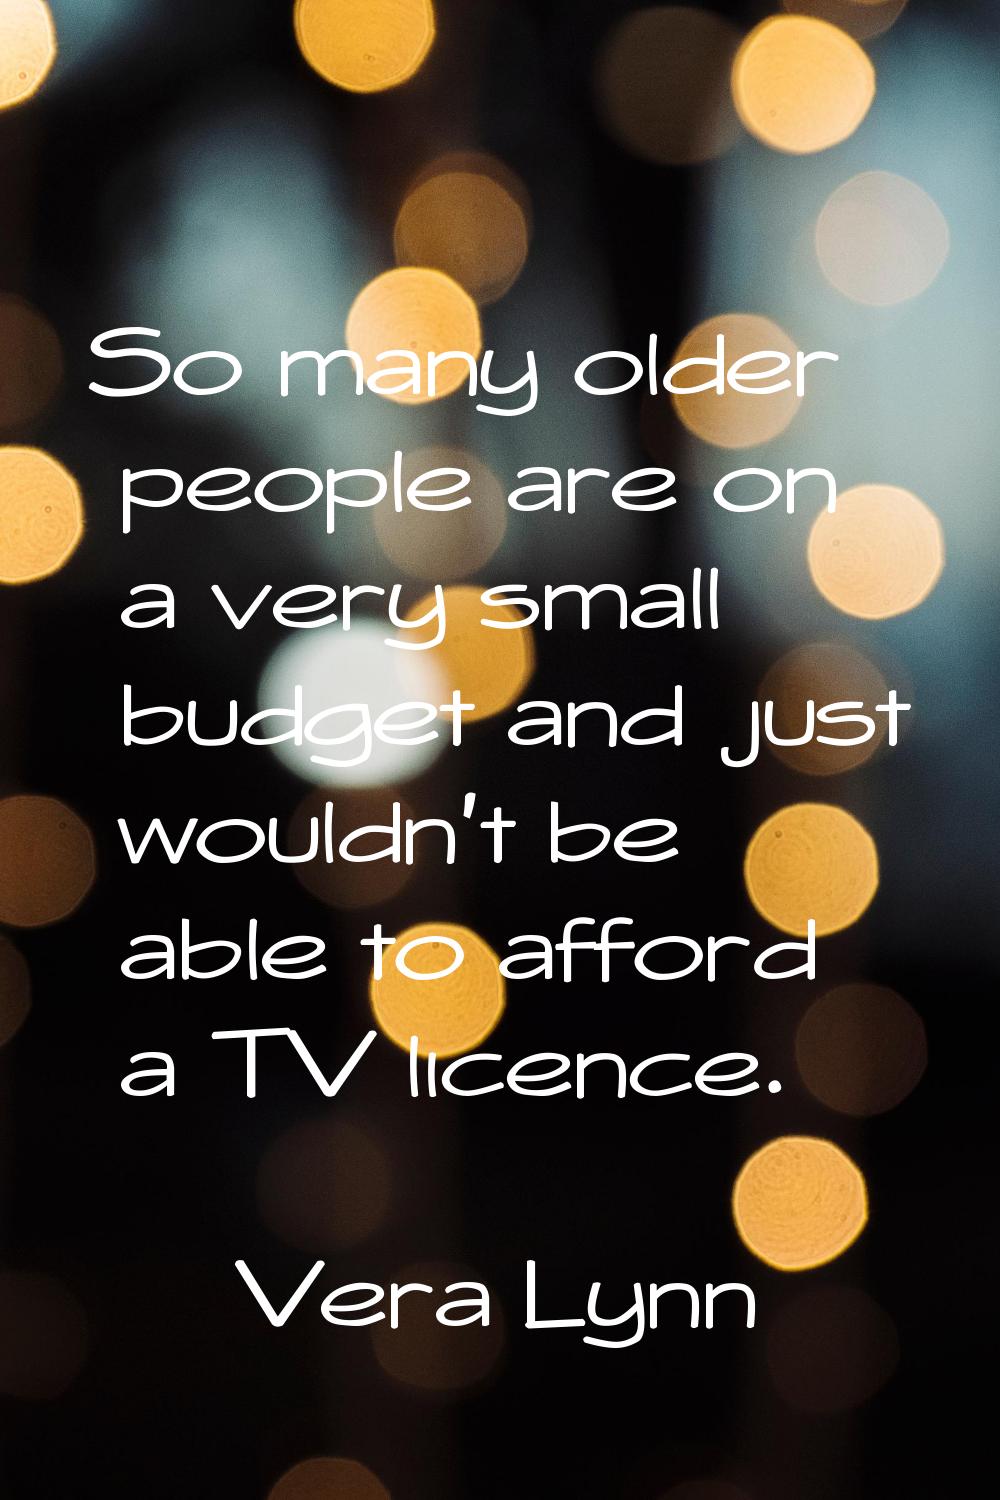 So many older people are on a very small budget and just wouldn't be able to afford a TV licence.